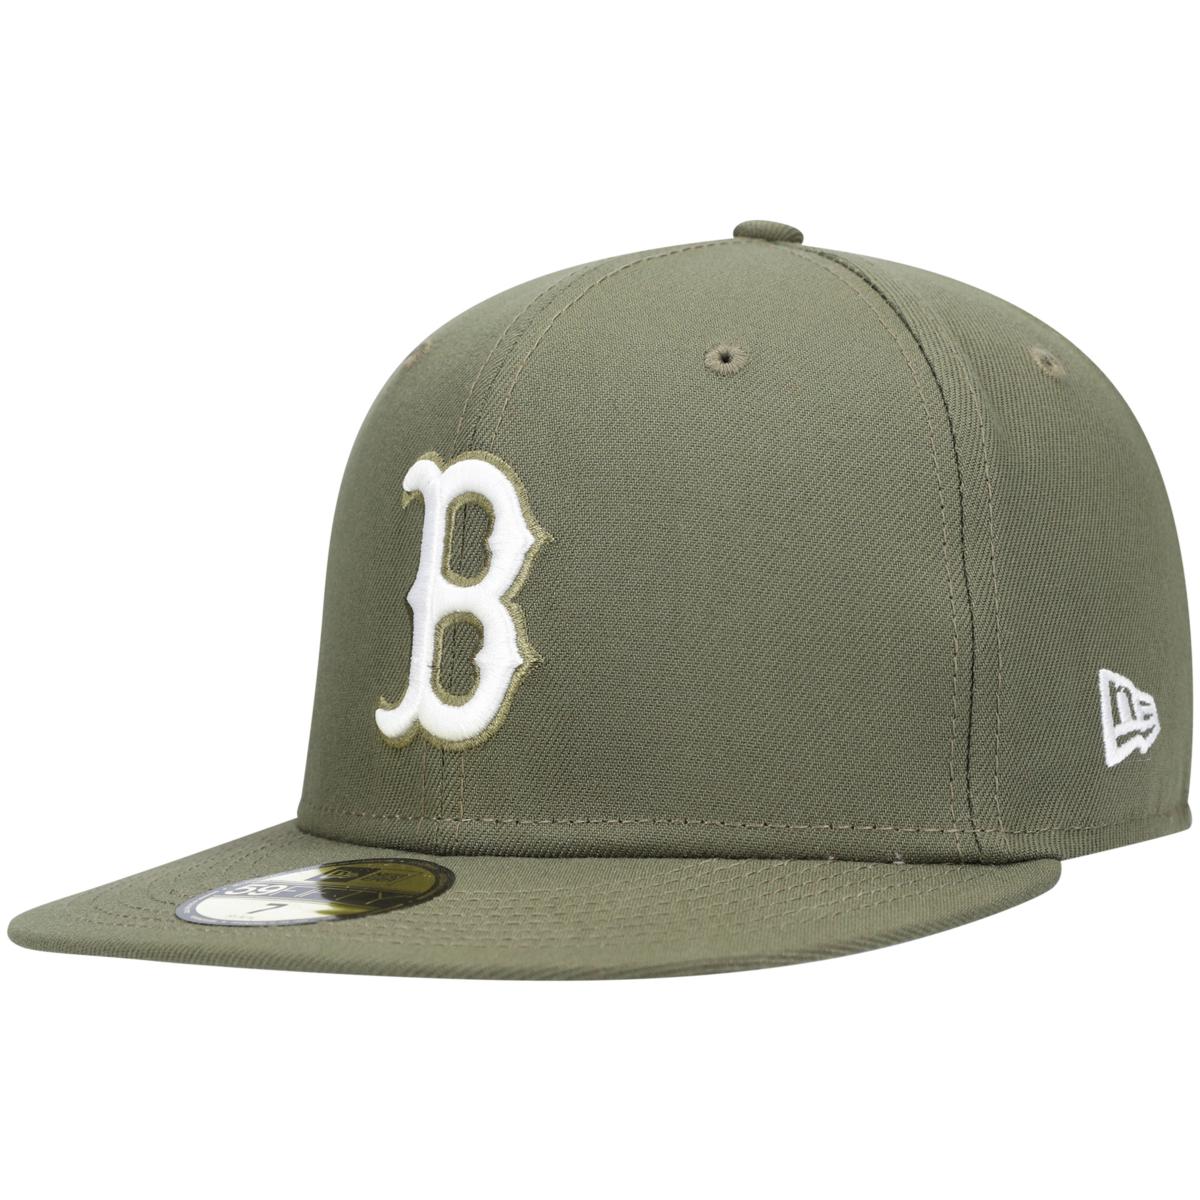 Officially Licensed MLB Men's New Era Olive Logo Fitted Hat - Red